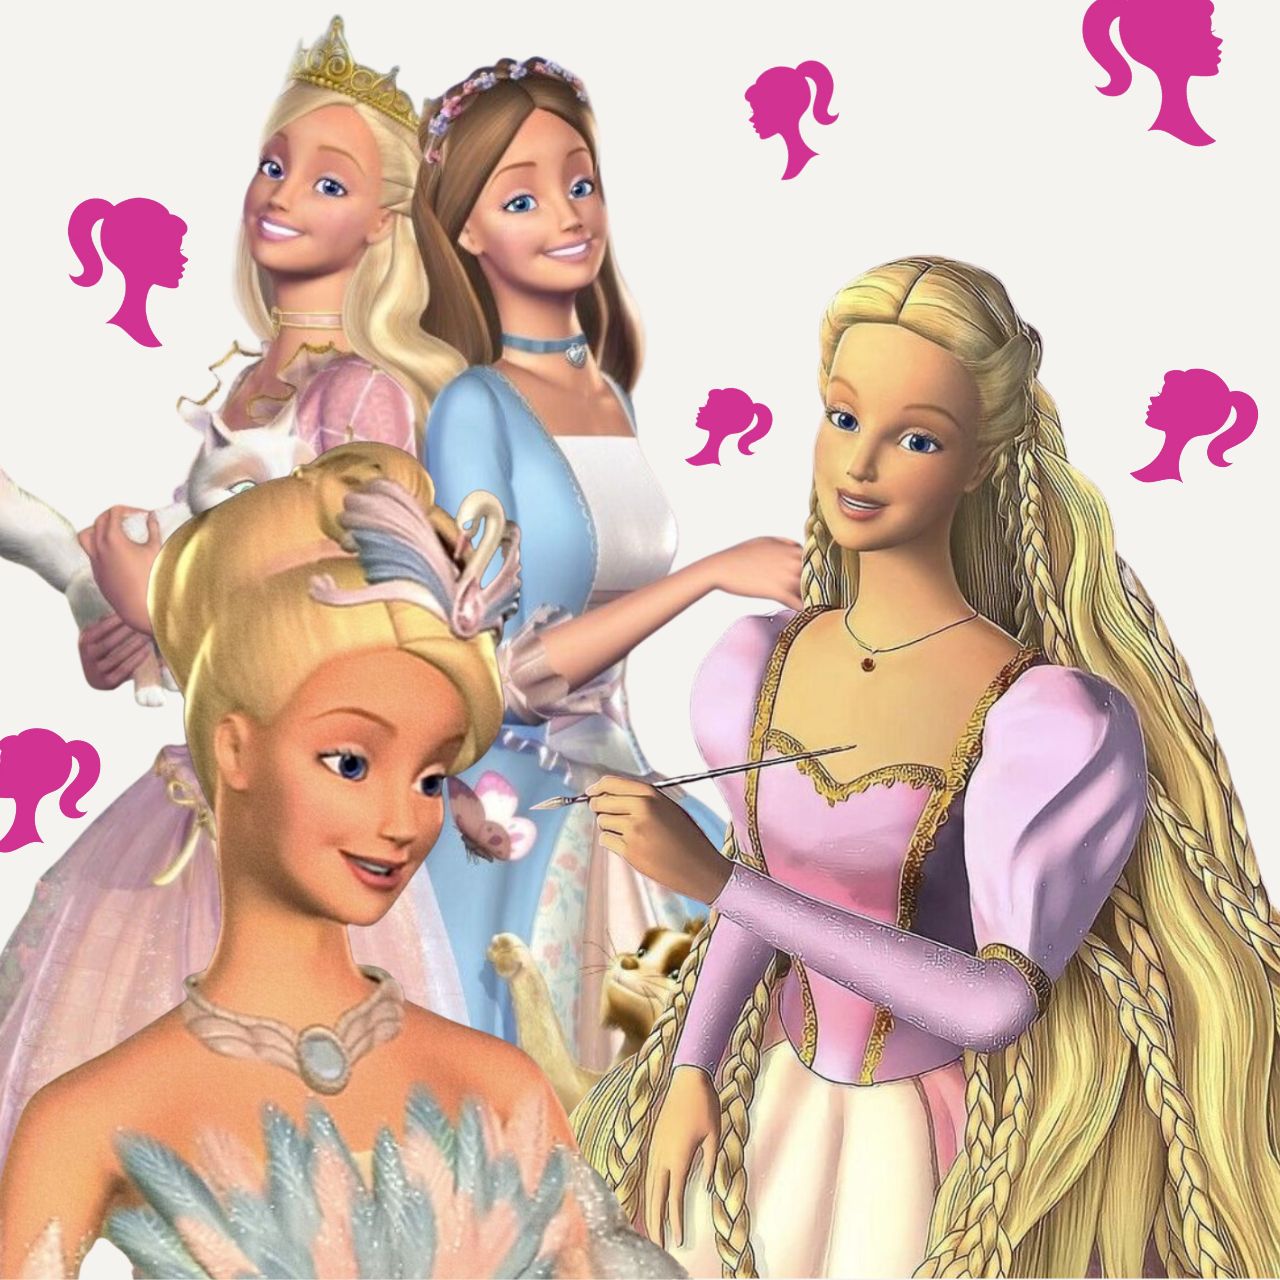 Classic Barbie Animated Movie Hair and Outfit Looks